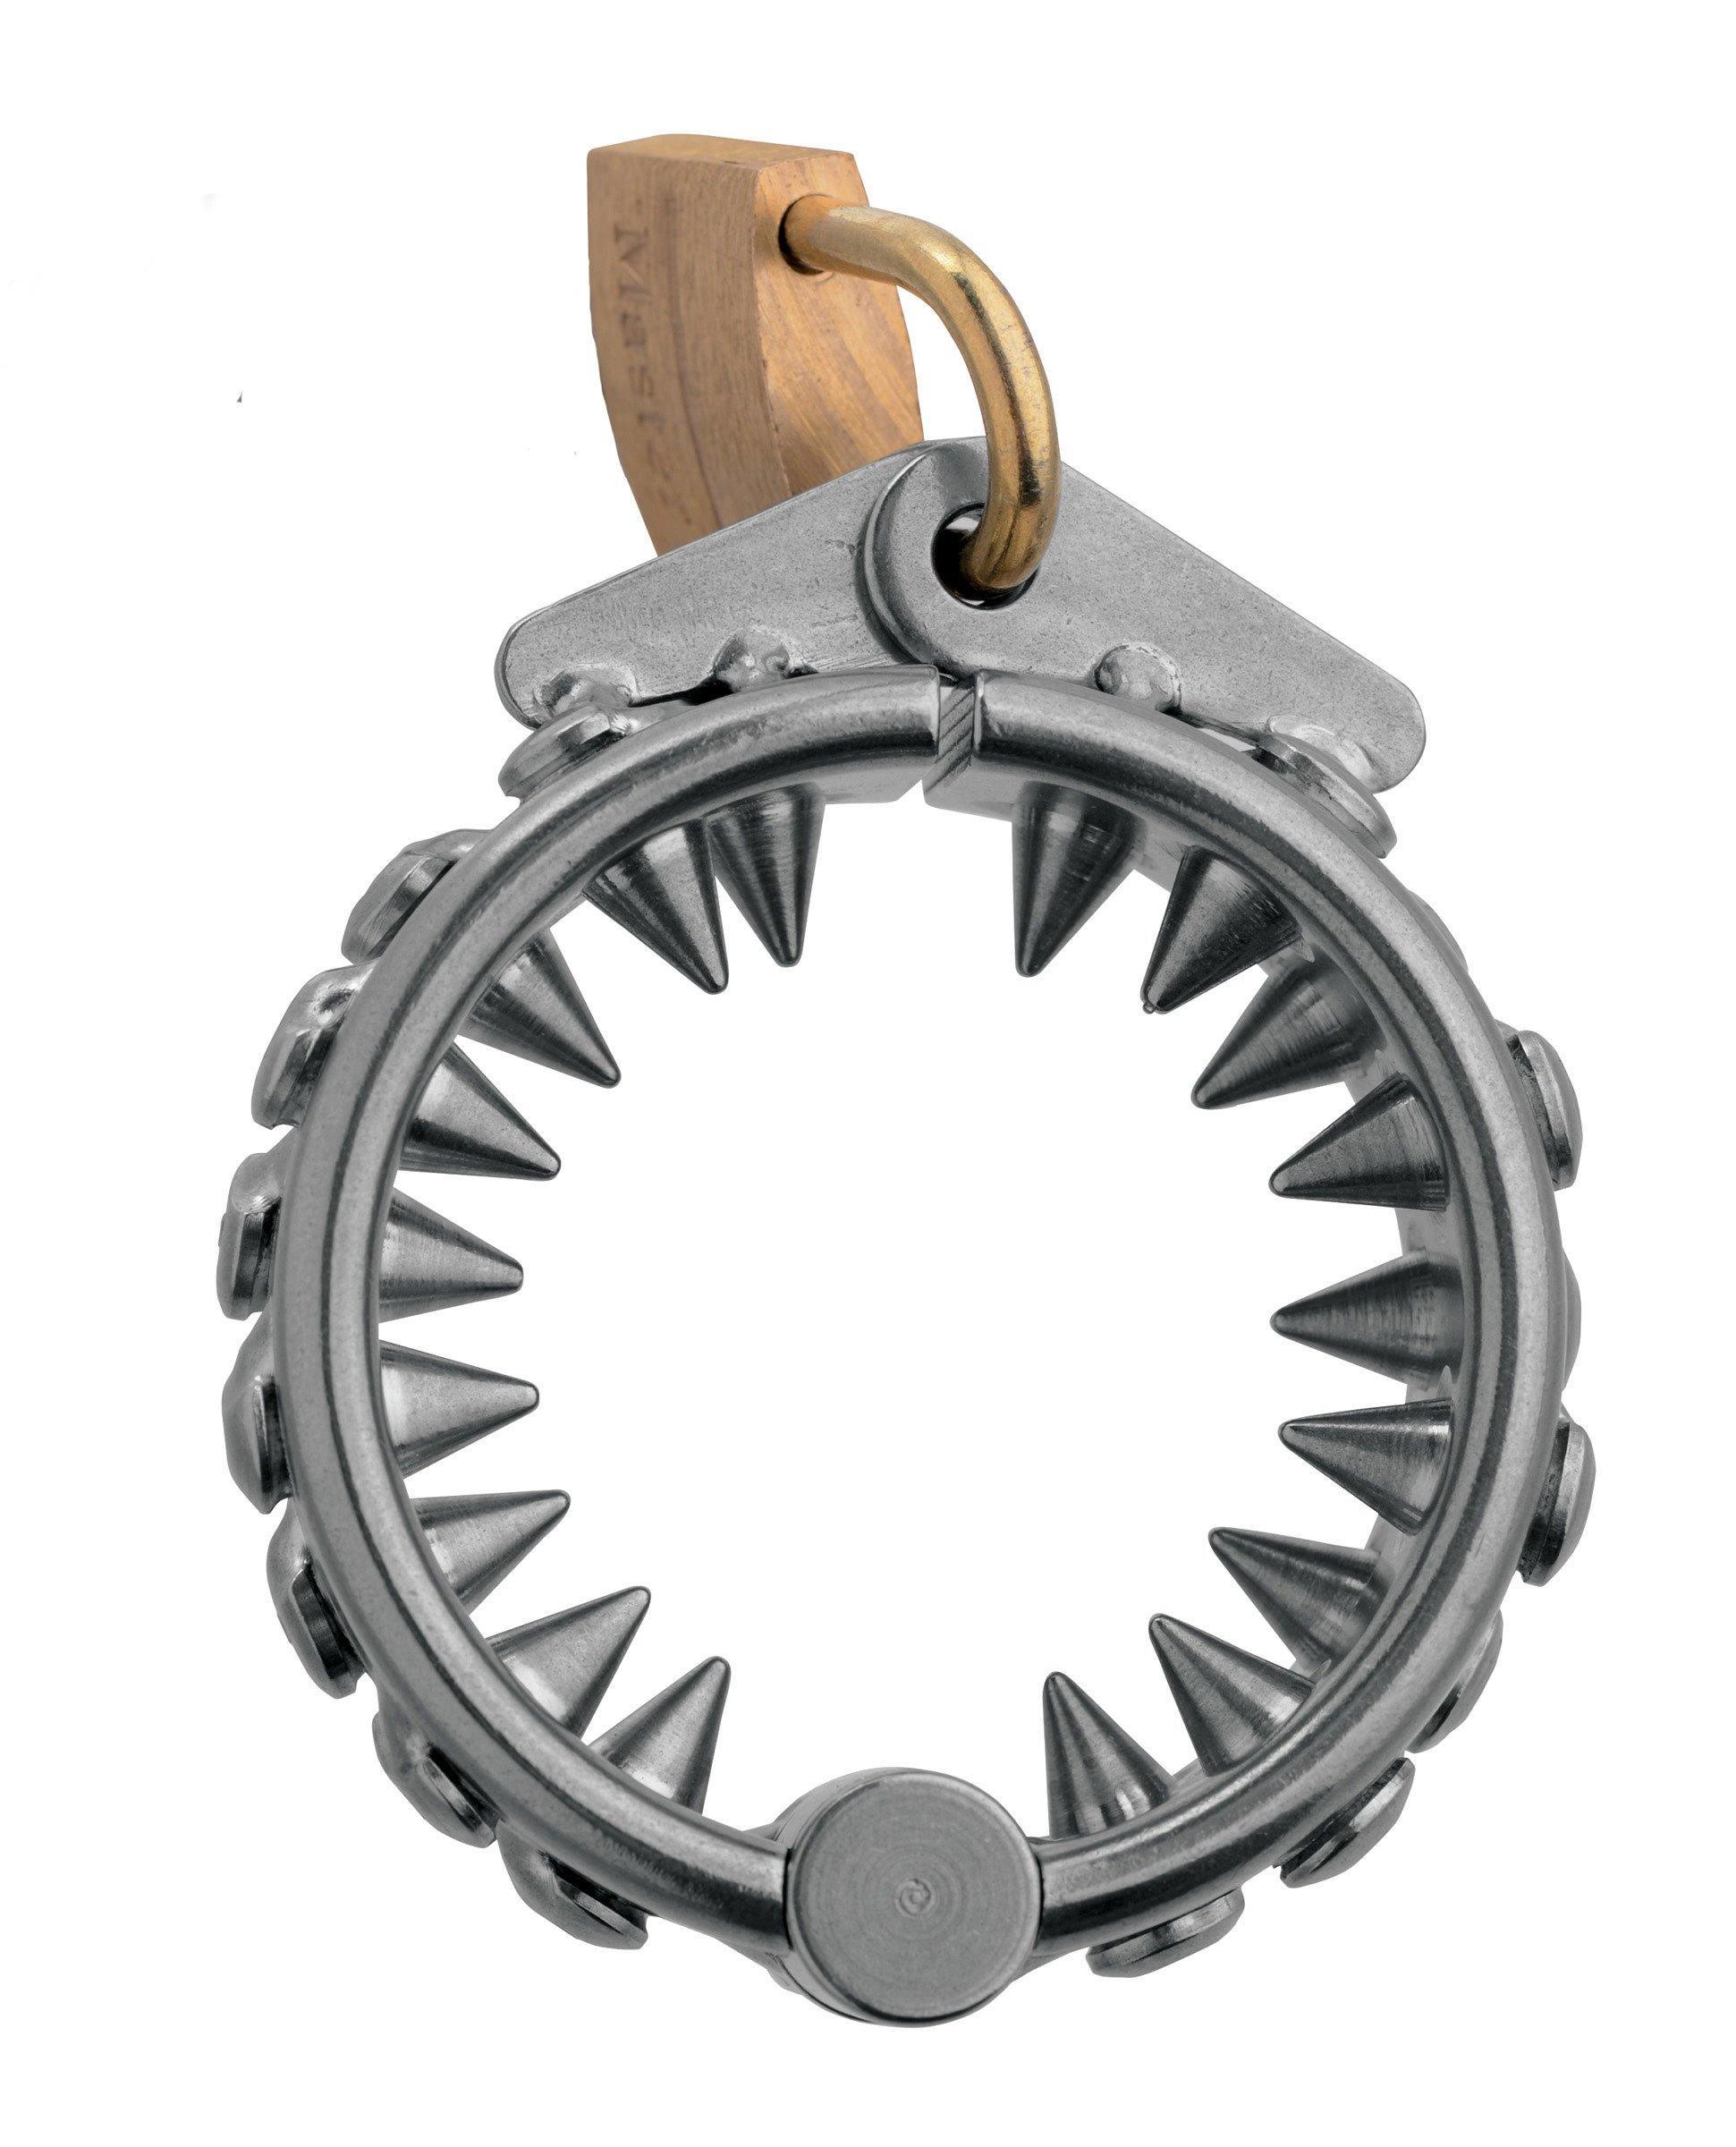 Impaler Locking Cbt Ring With Spikes - My Sex Toy Hub